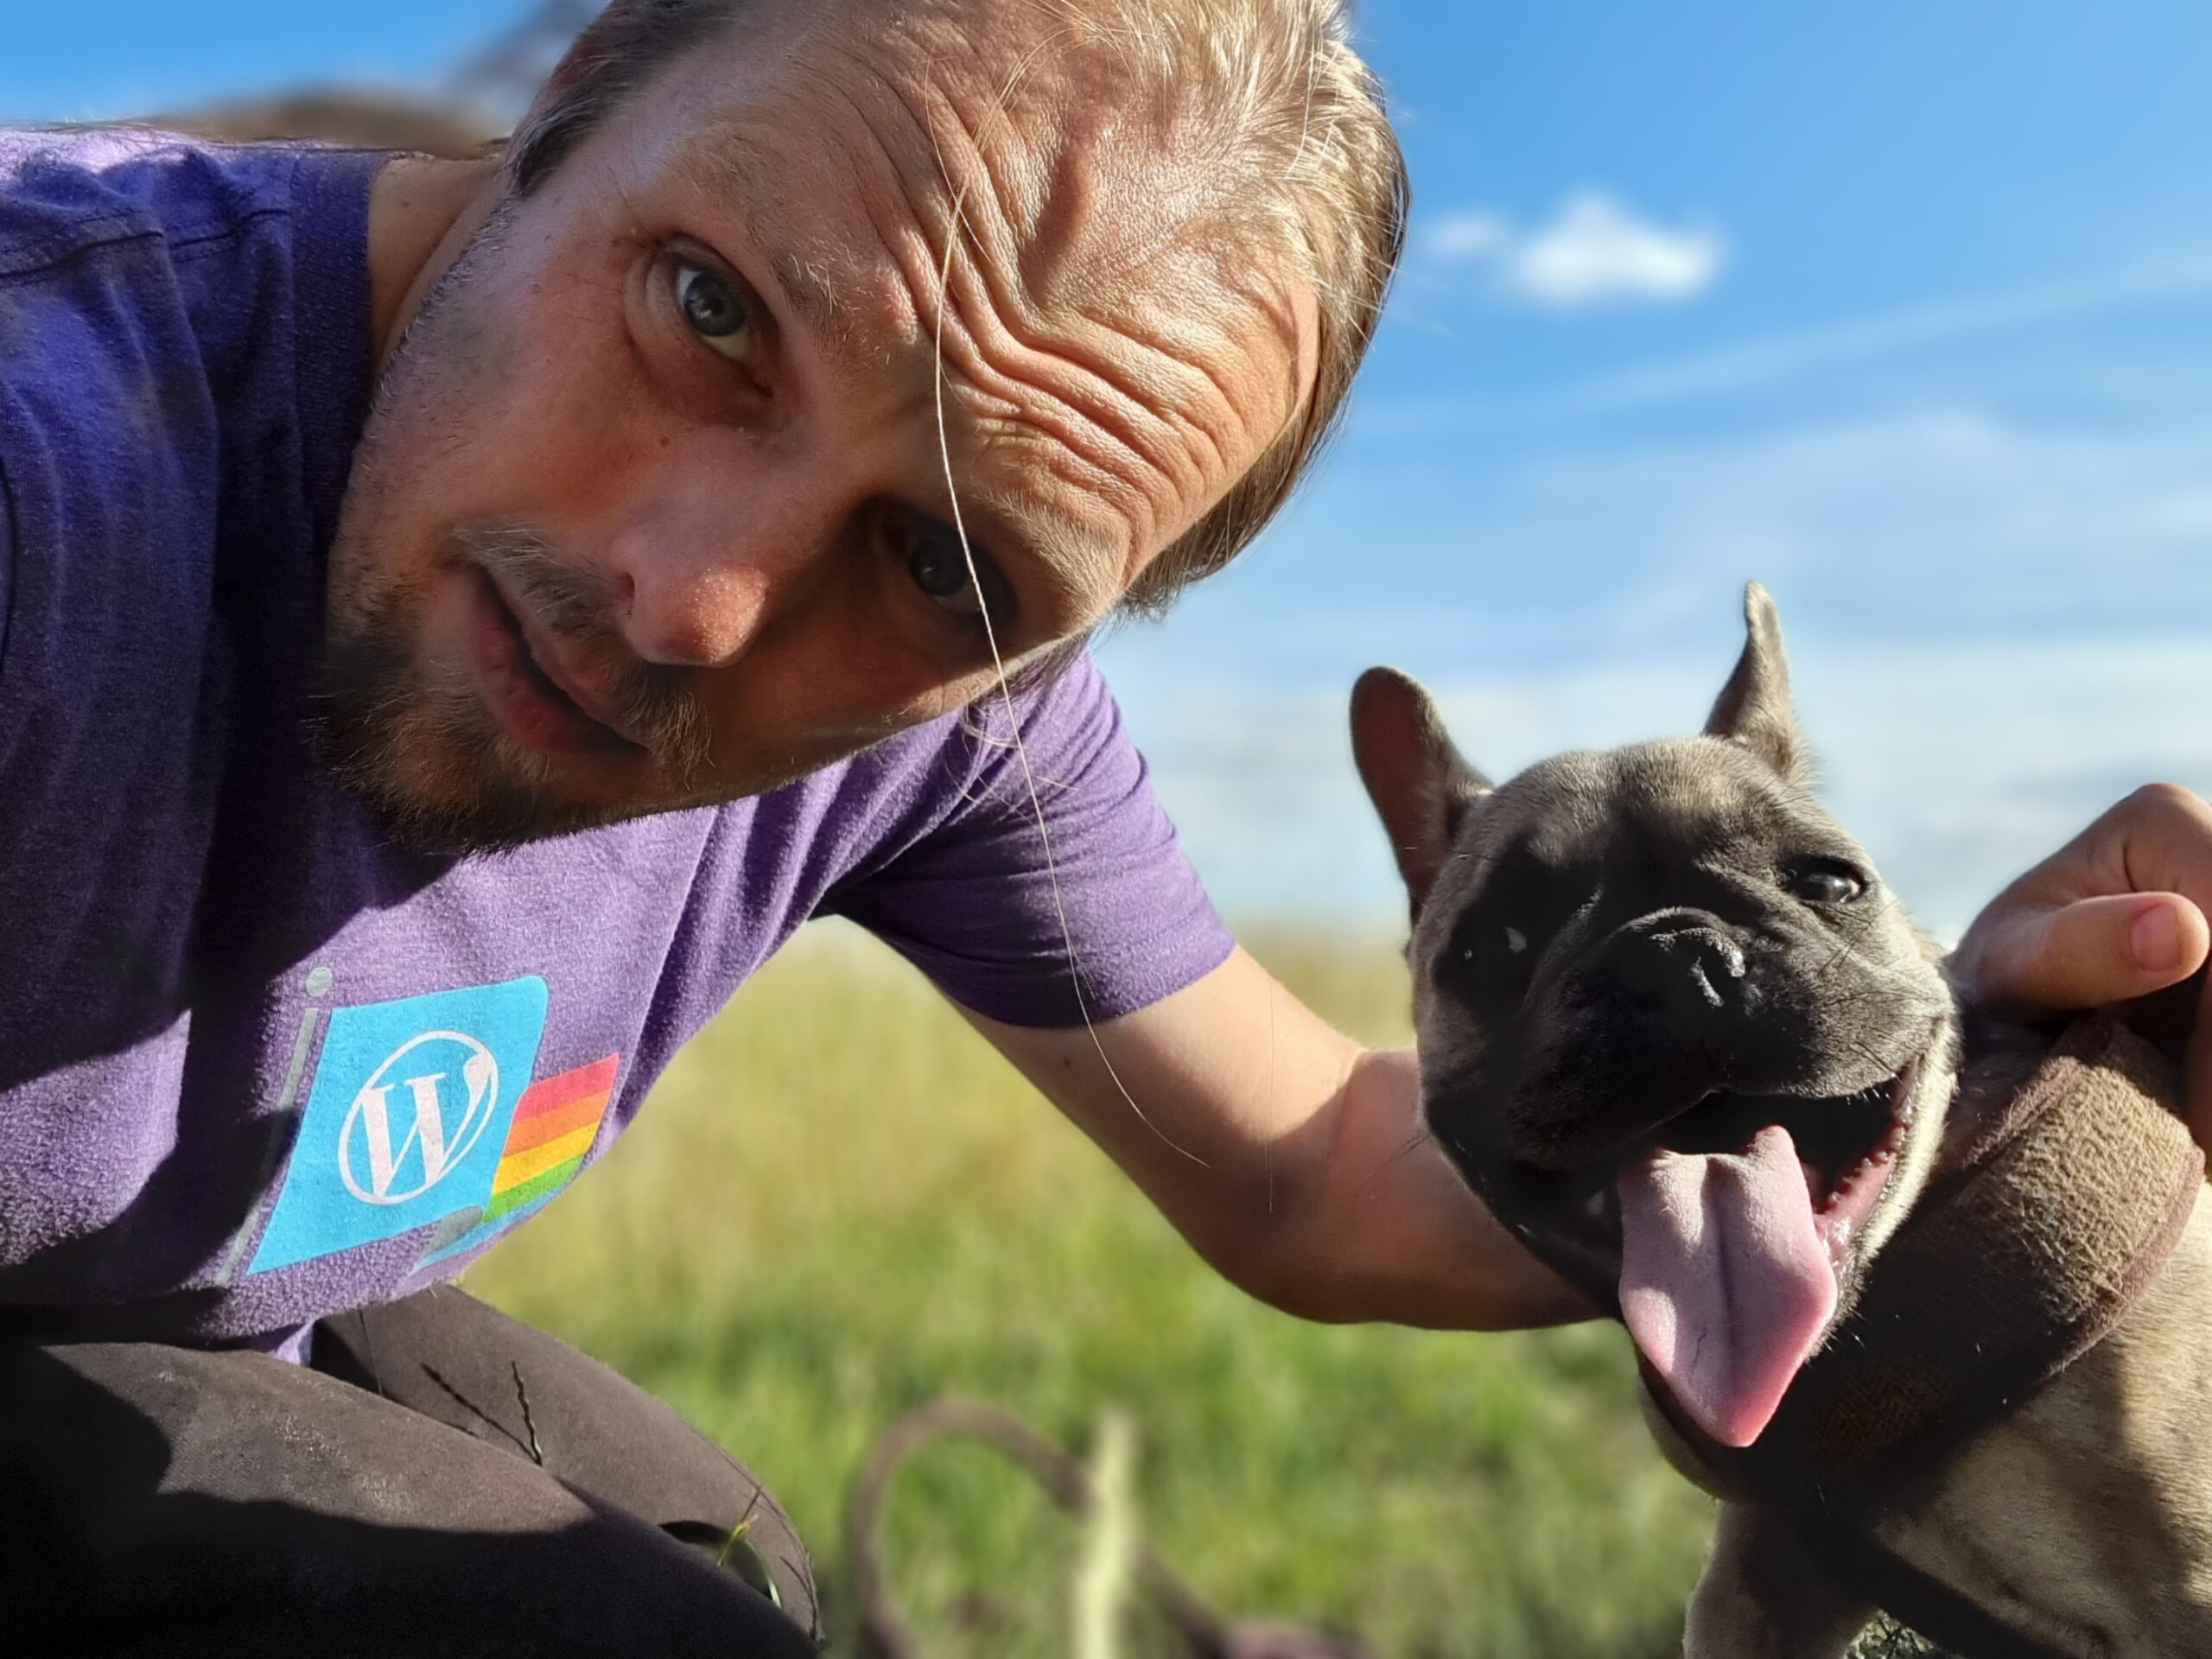 Under bright blue skies and in a green field, Dan and Demmy stare into the camera. Dan's flushed from the heat and wearing a purple-and-rainbow "WordPress Pride" t-shirt; Demmy's tongue hangs low and she's clearly panting.